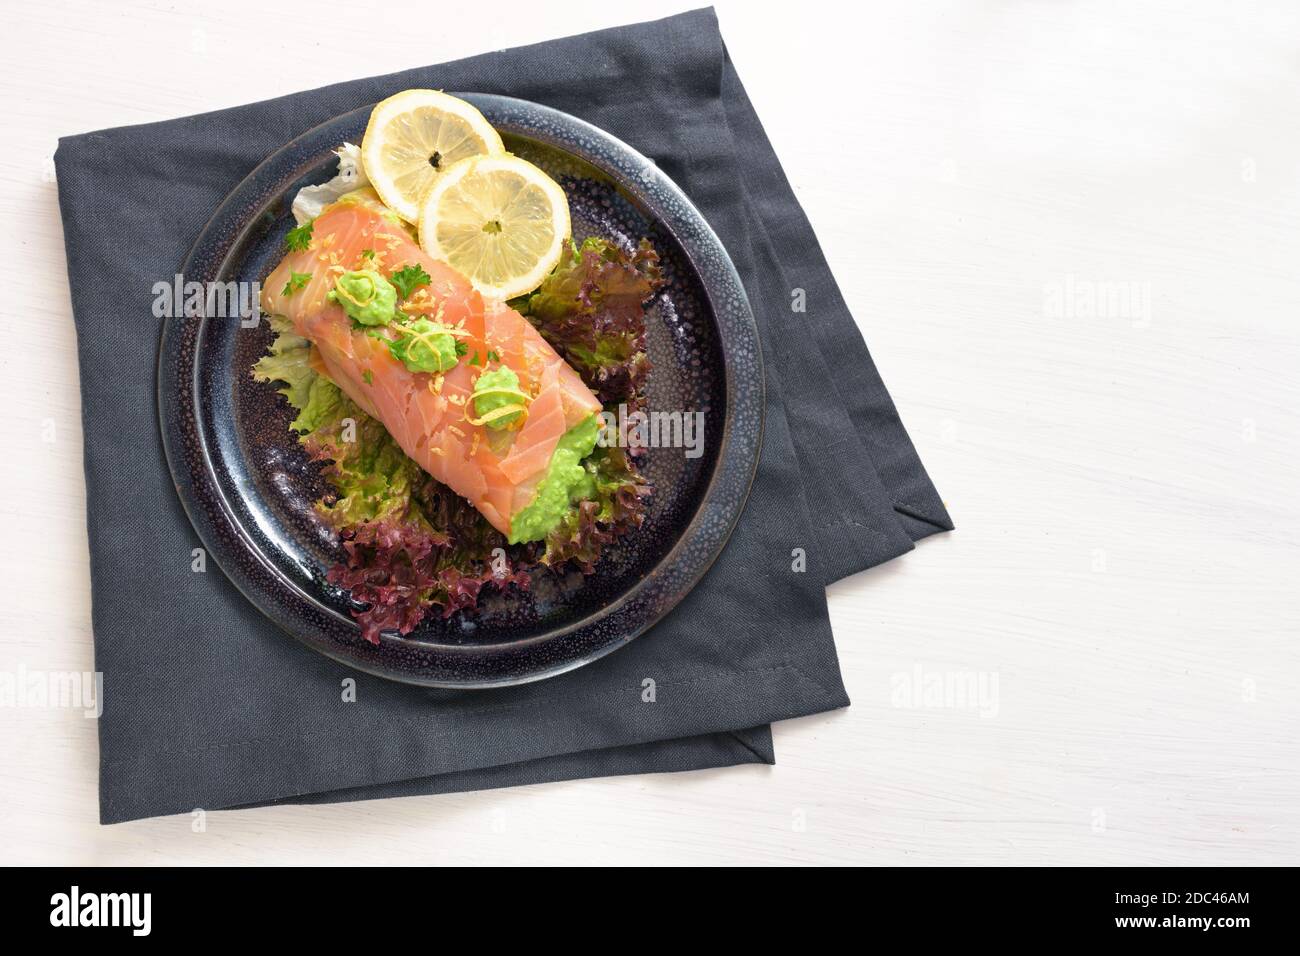 Smoked salmon filled with pea puree on lettuce salad with lemon slices and parsley garnish, dark plate and napkin on a white table, copy space, high a Stock Photo